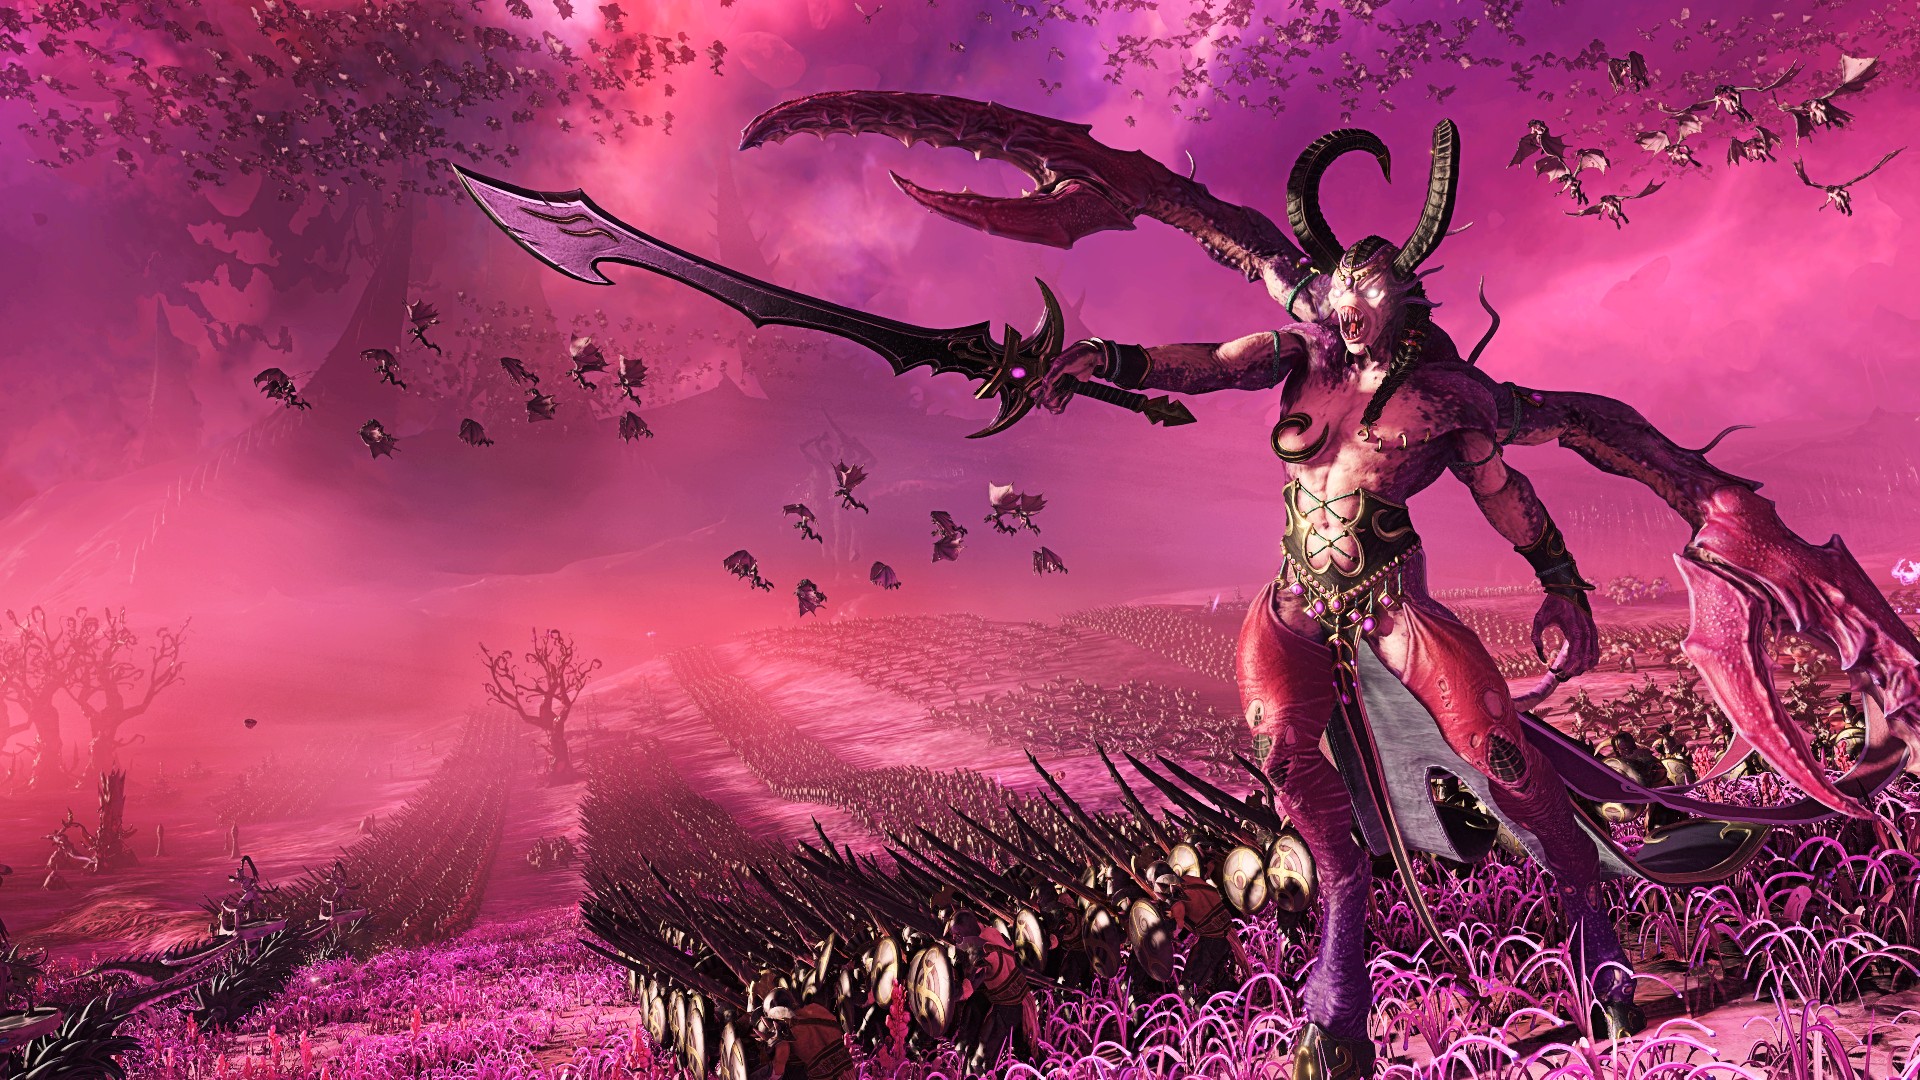 Total War: Warhammer 3’s Slaanesh wants you to embrace your kinks